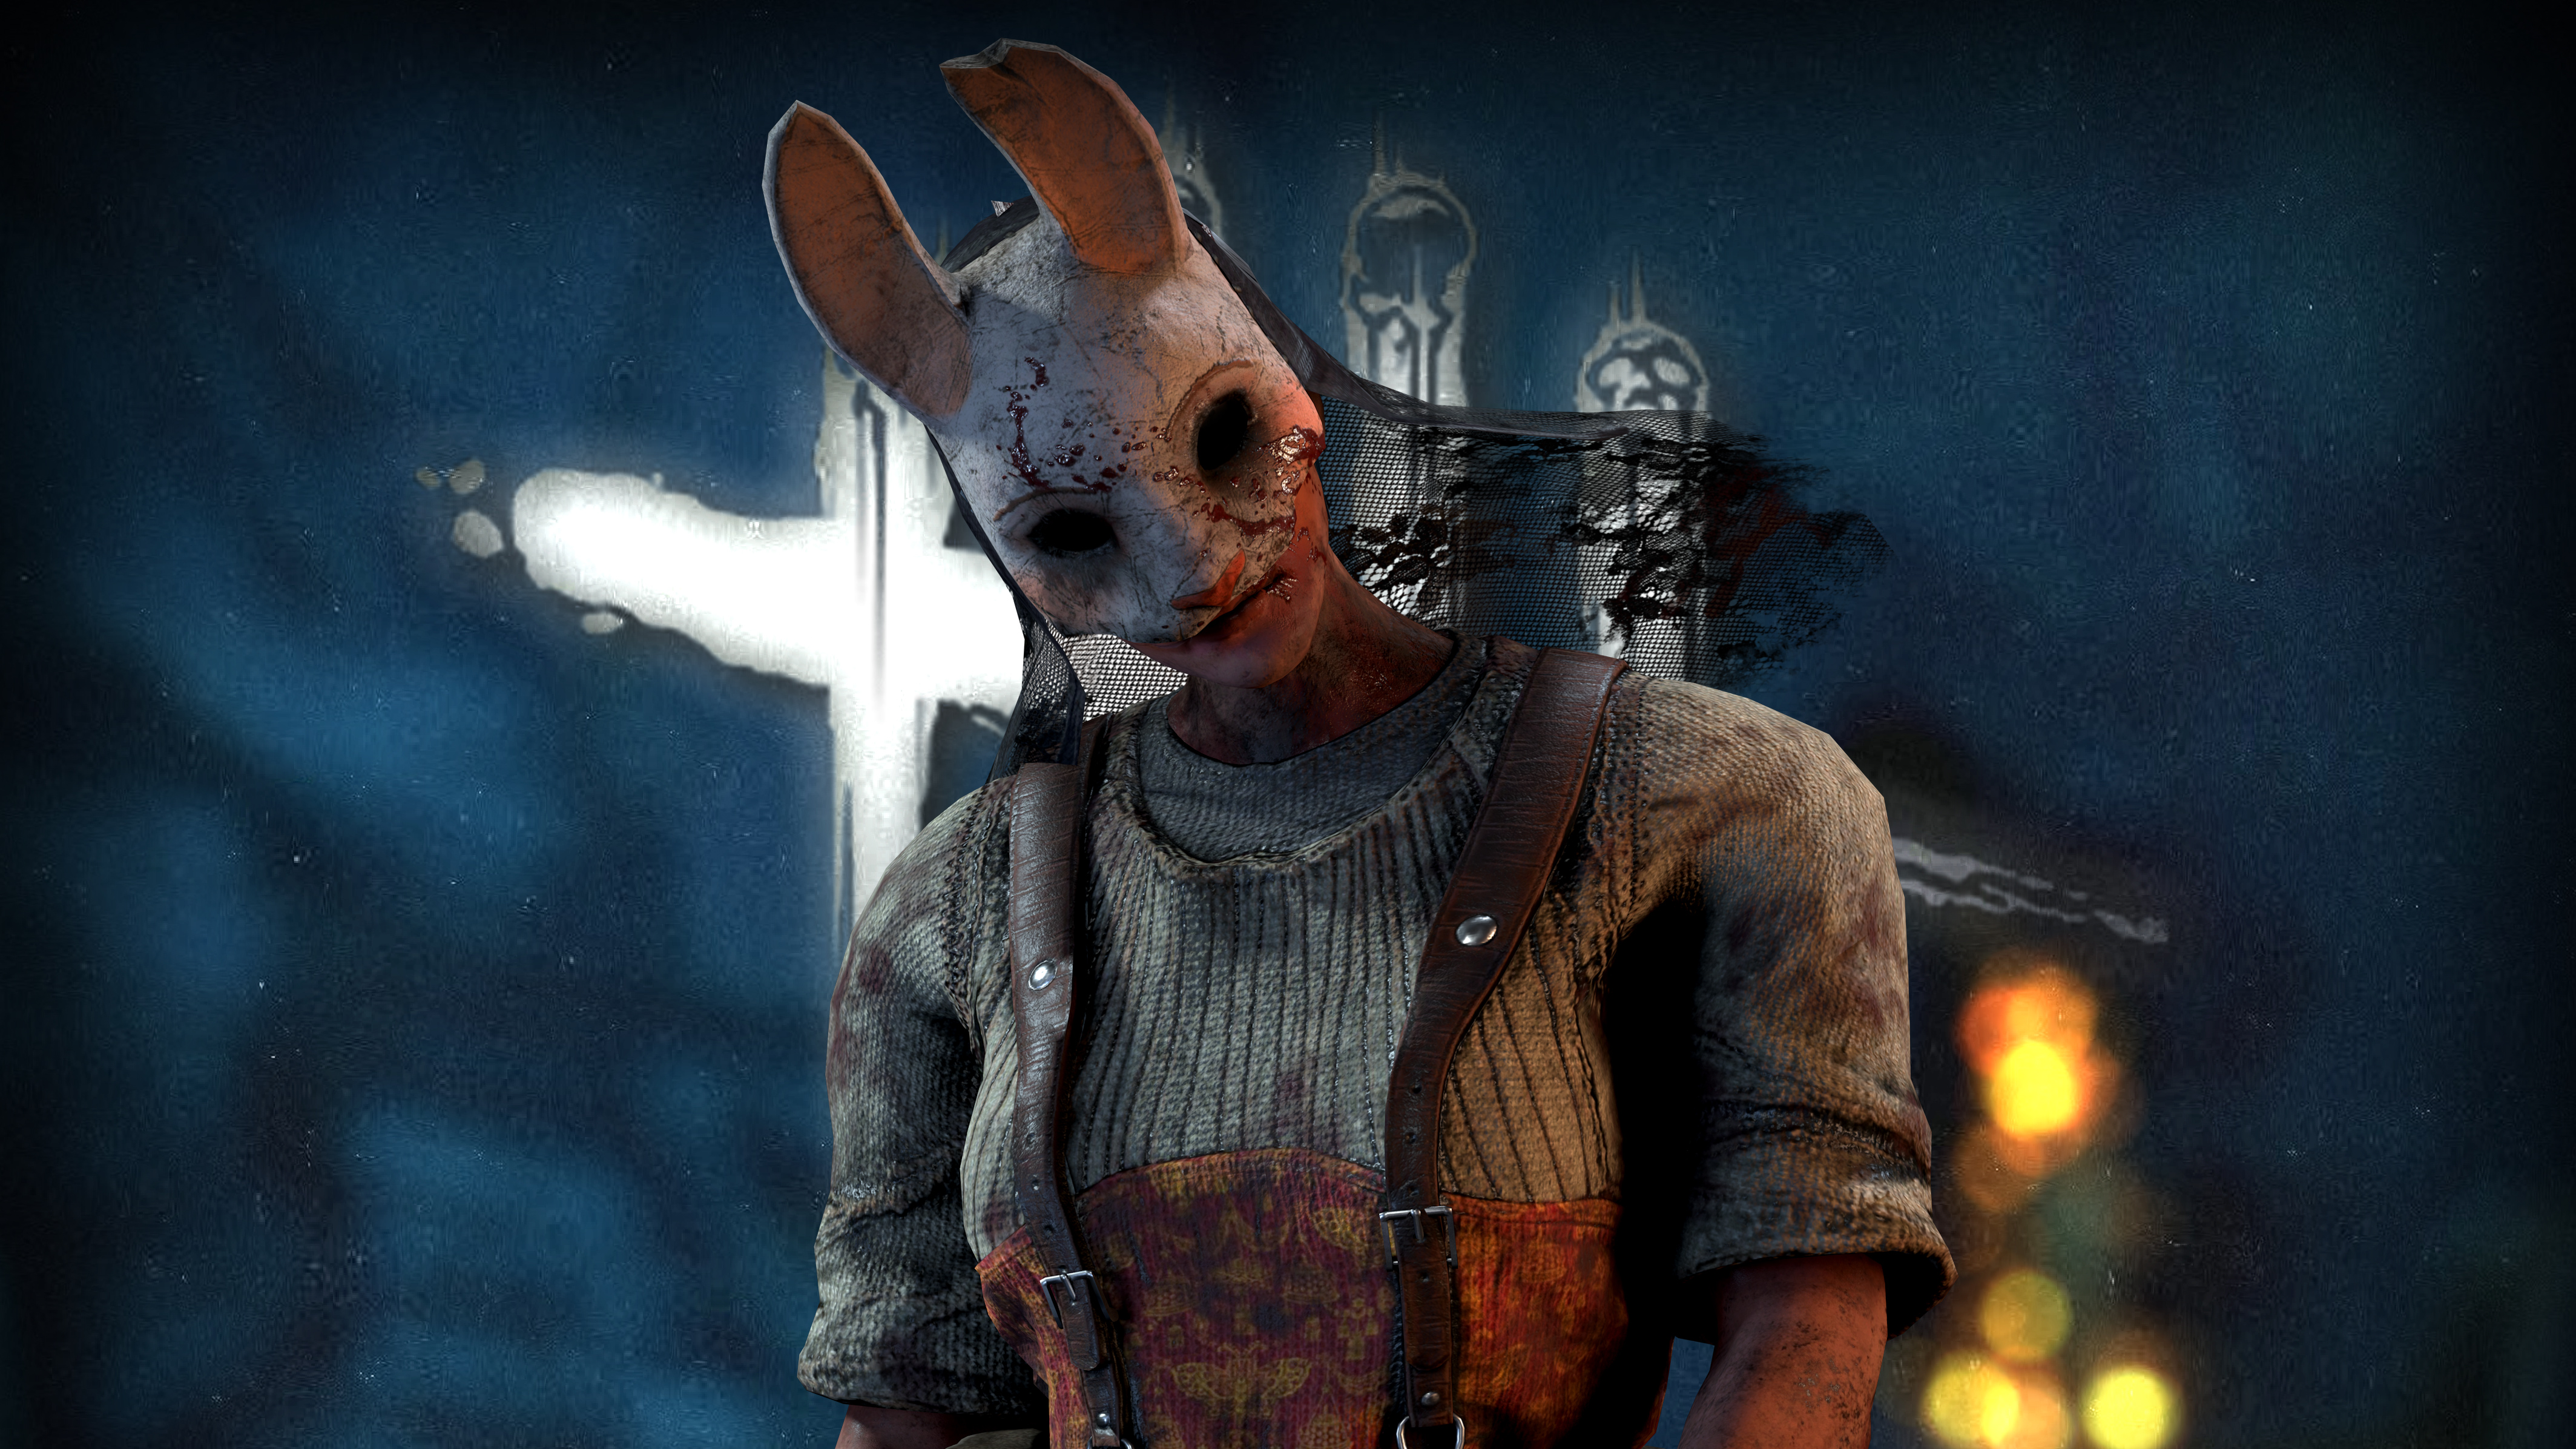 dead by daylight wallpaper,fictional character,screenshot,pc game,fiction,digital compositing